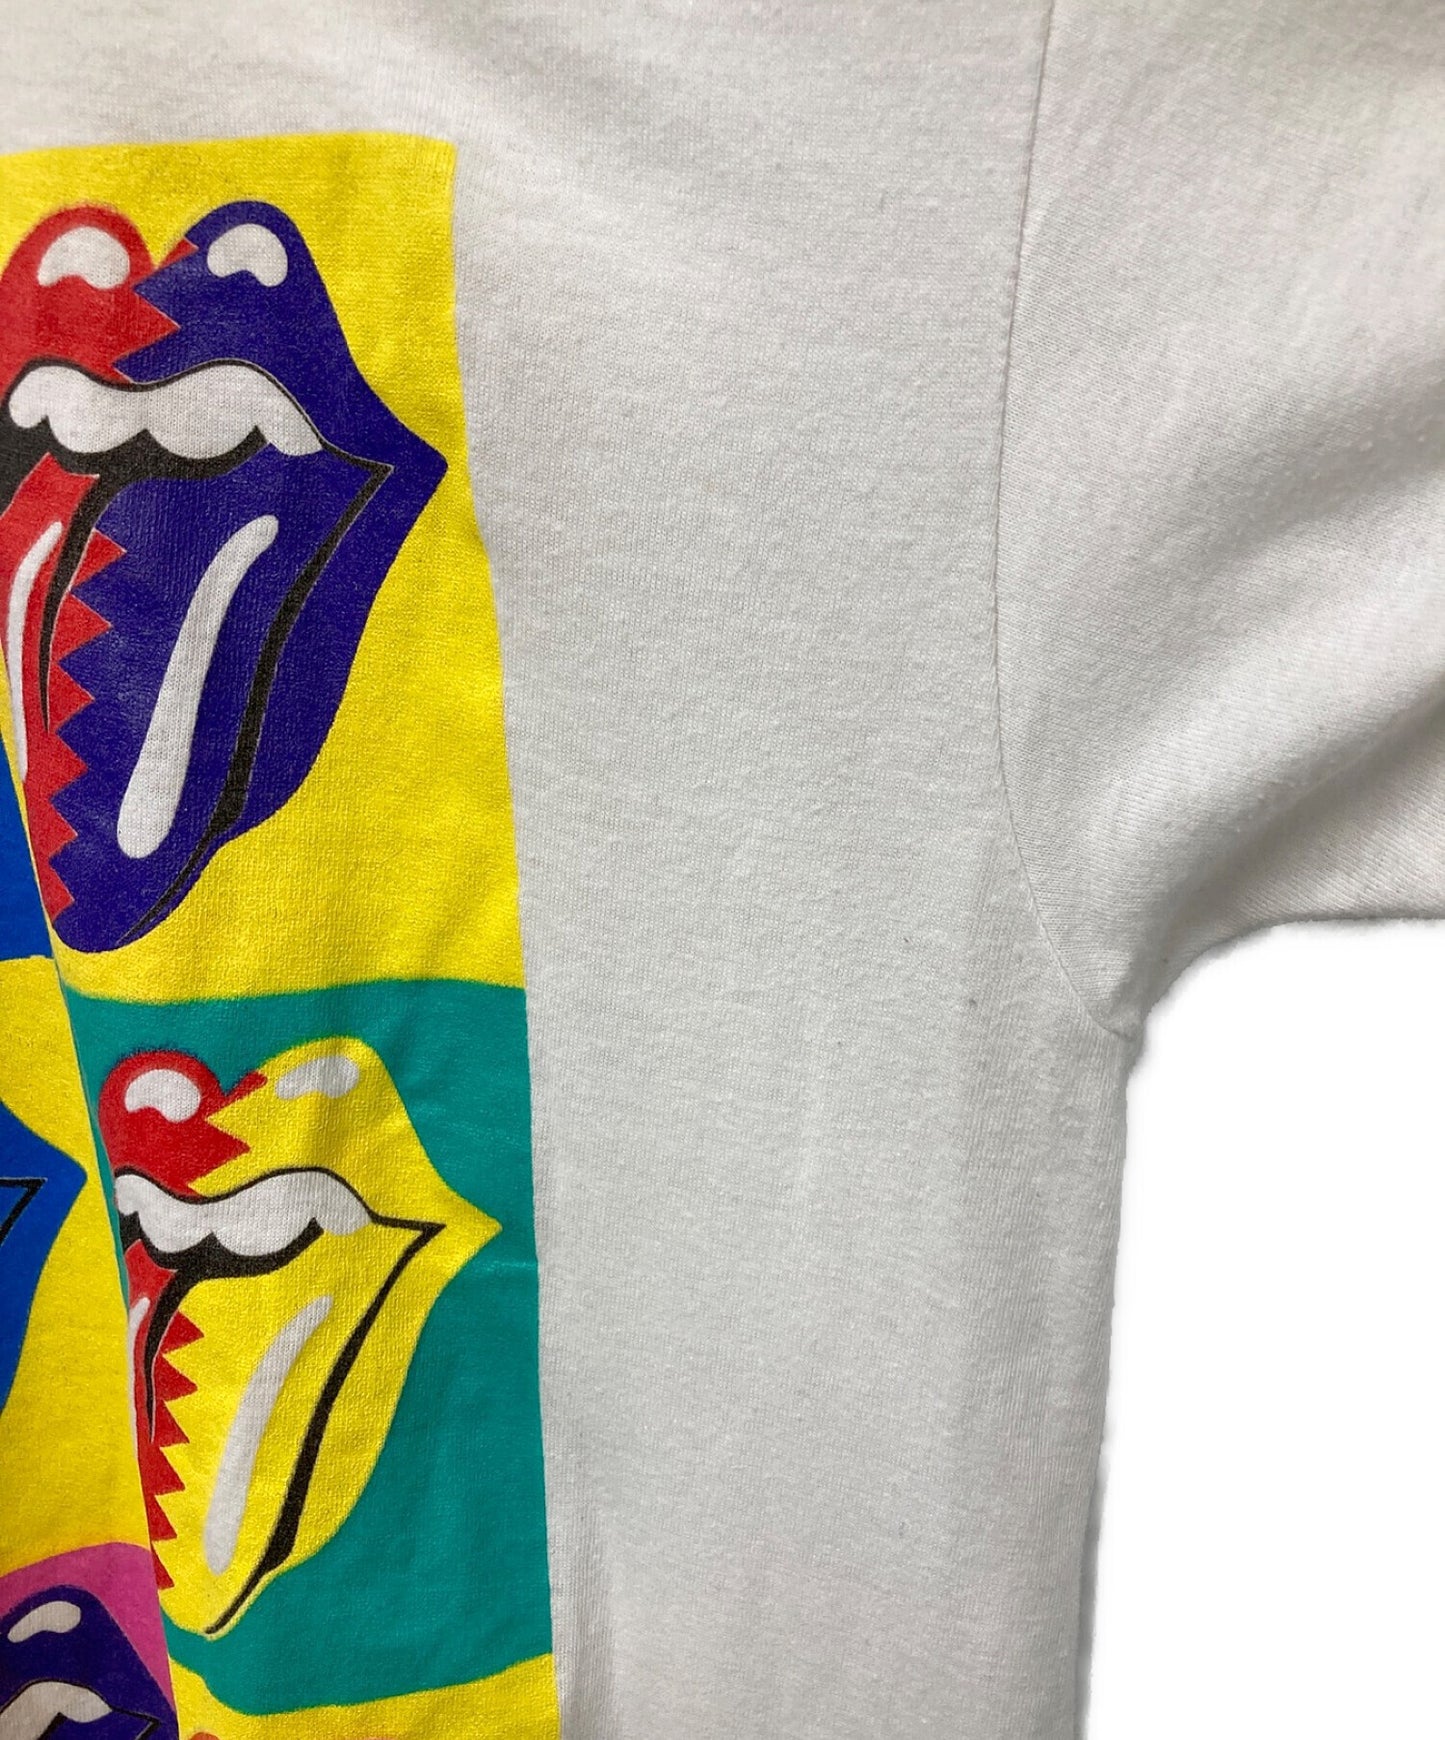 [Pre-owned] THE ROLLING STONES Band T-shirt with copyright 1989 North American Tour